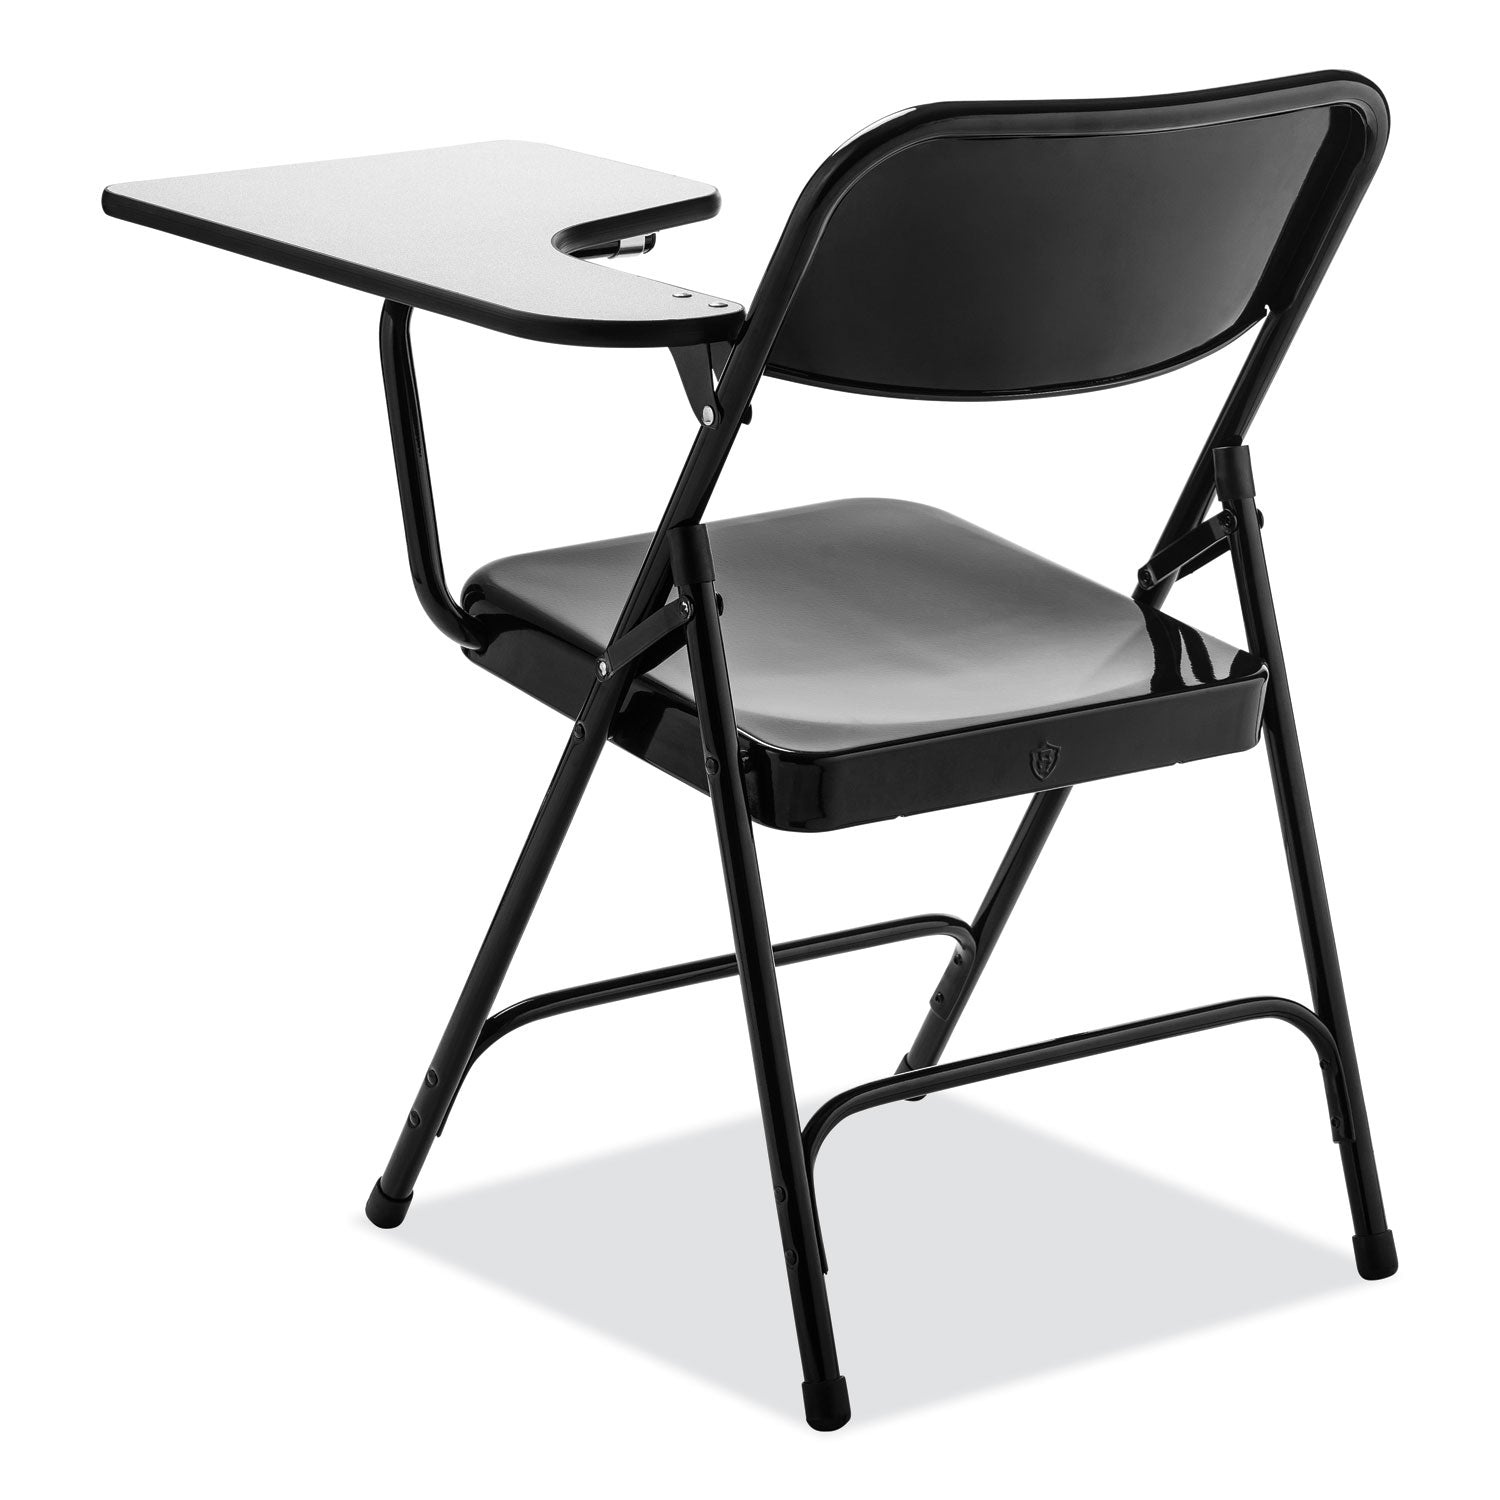 5200-series-left-side-tablet-arm-folding-chair-supports-480-lb-1725-seat-height-black-2-carton-ships-in-1-3-bus-days_nps5210l - 4